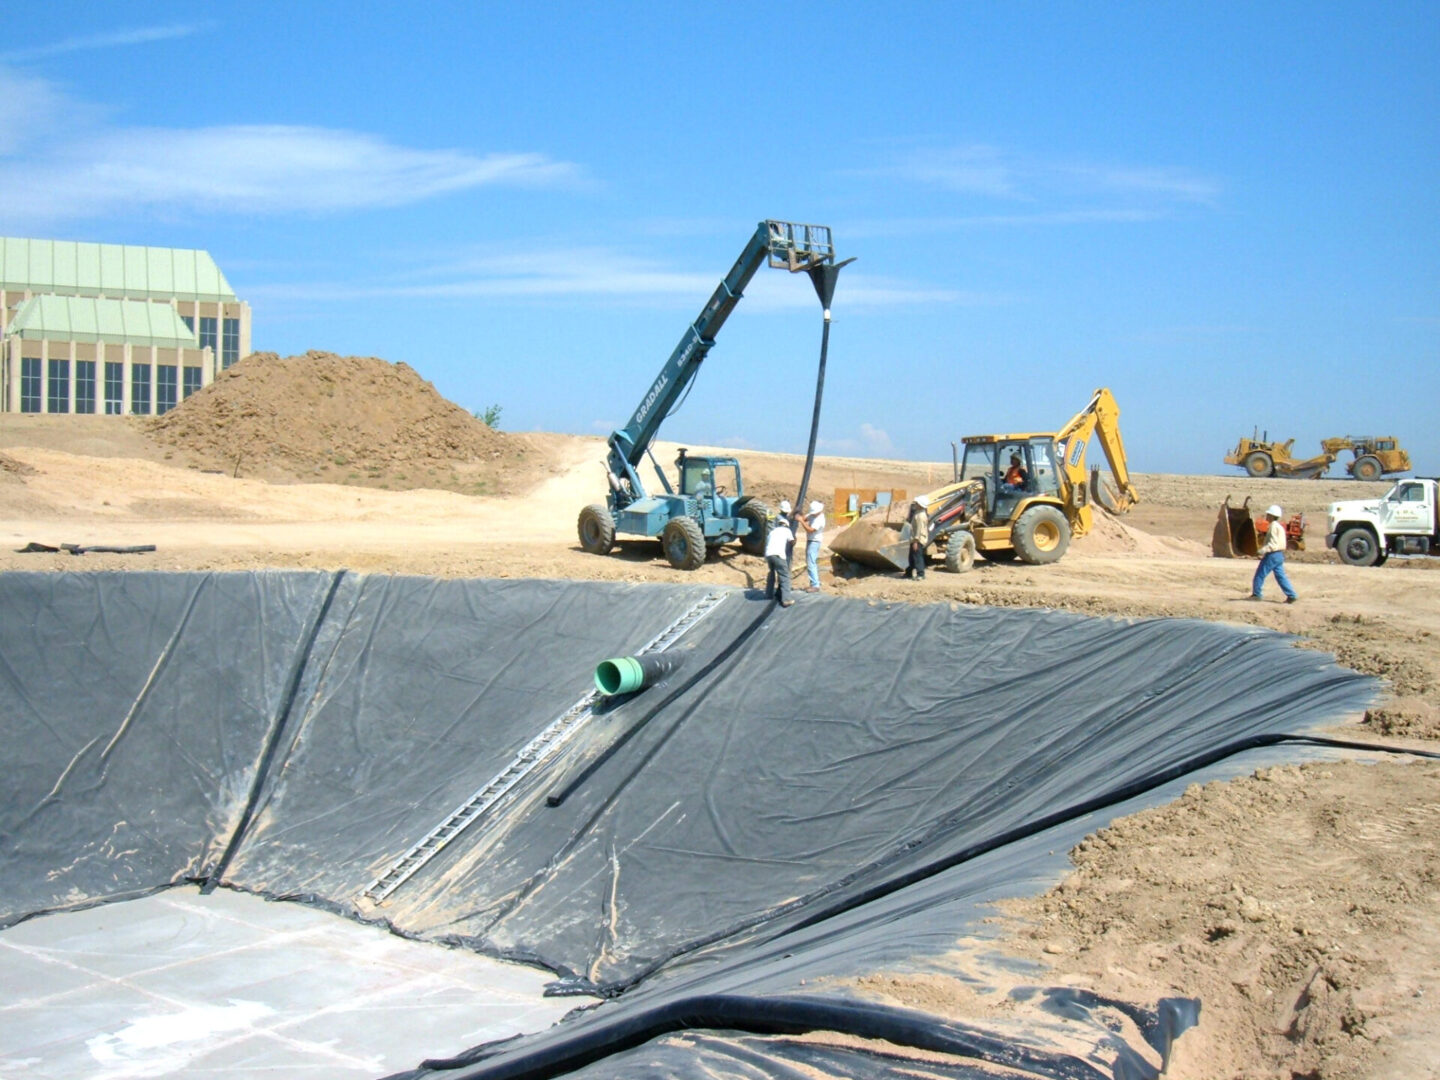 A construction site with machinery and sand.